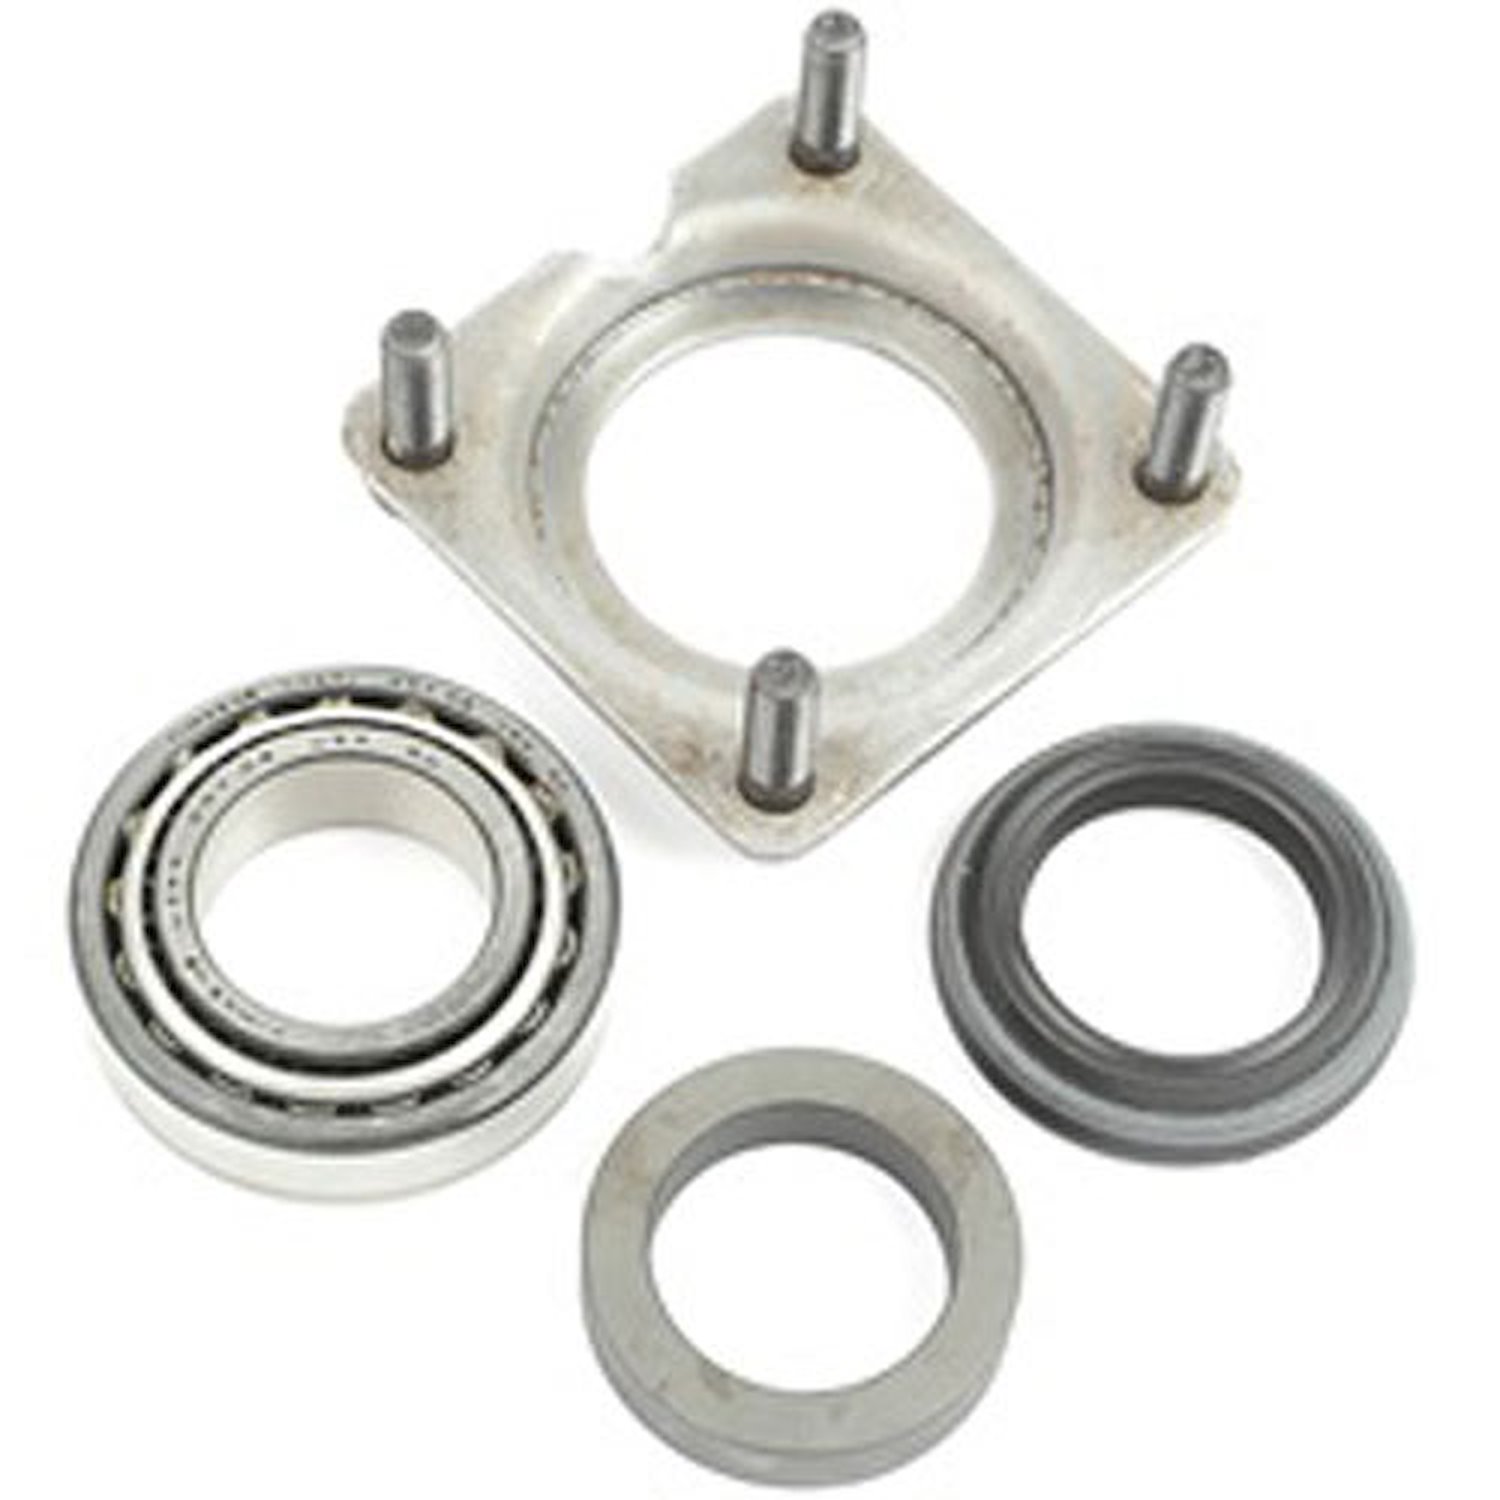 This axle shaft bearing kit from Omix-ADA fits 99-04 Jeep Grand Cherokees with Dana 35 and 44 rear axles.